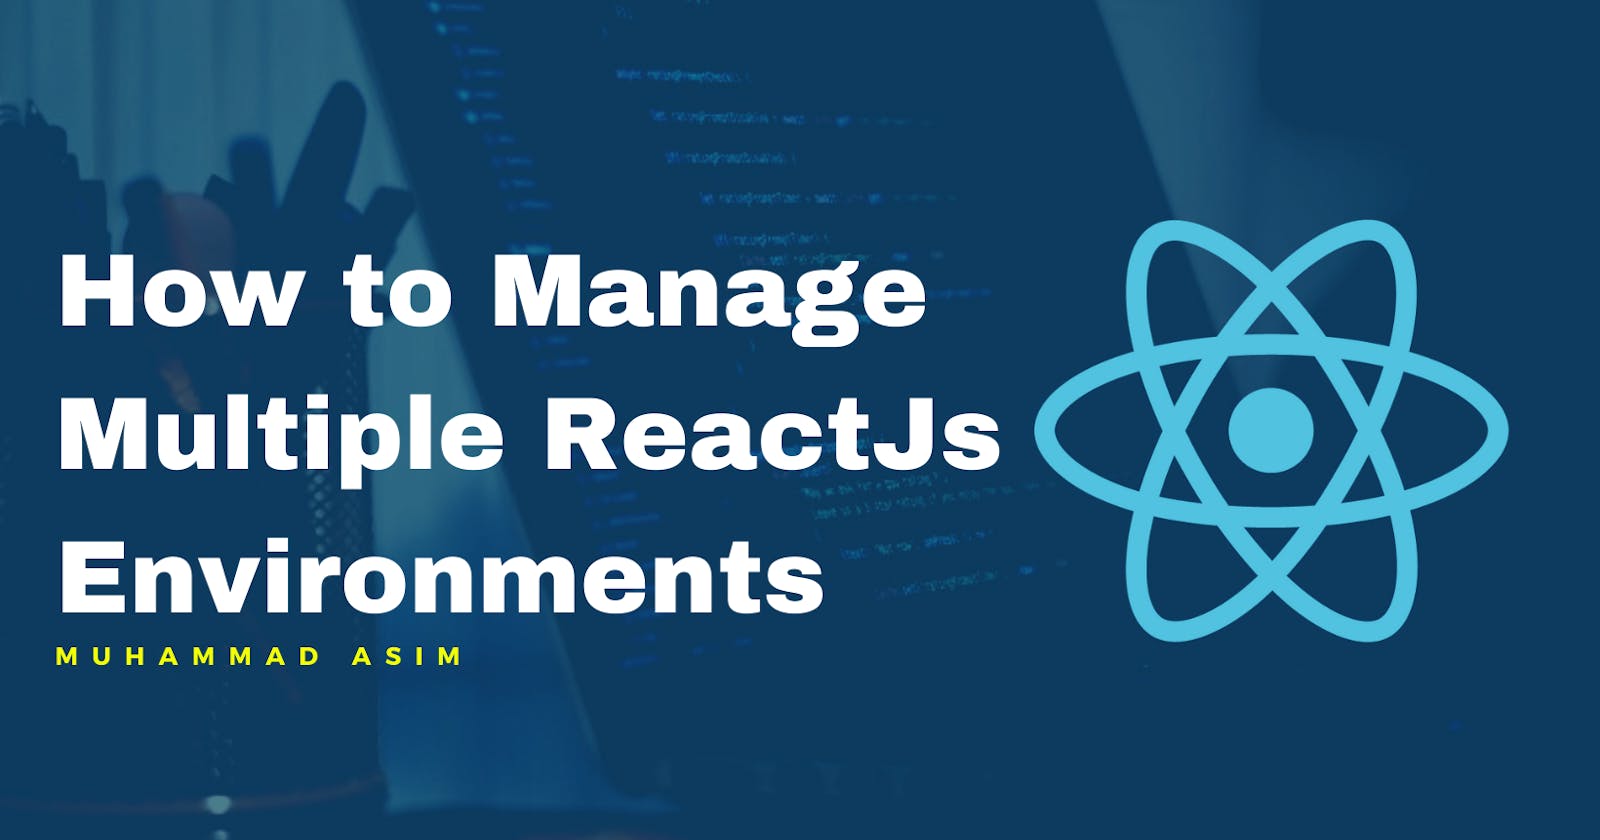 How to Manage Multiple ReactJs Environments